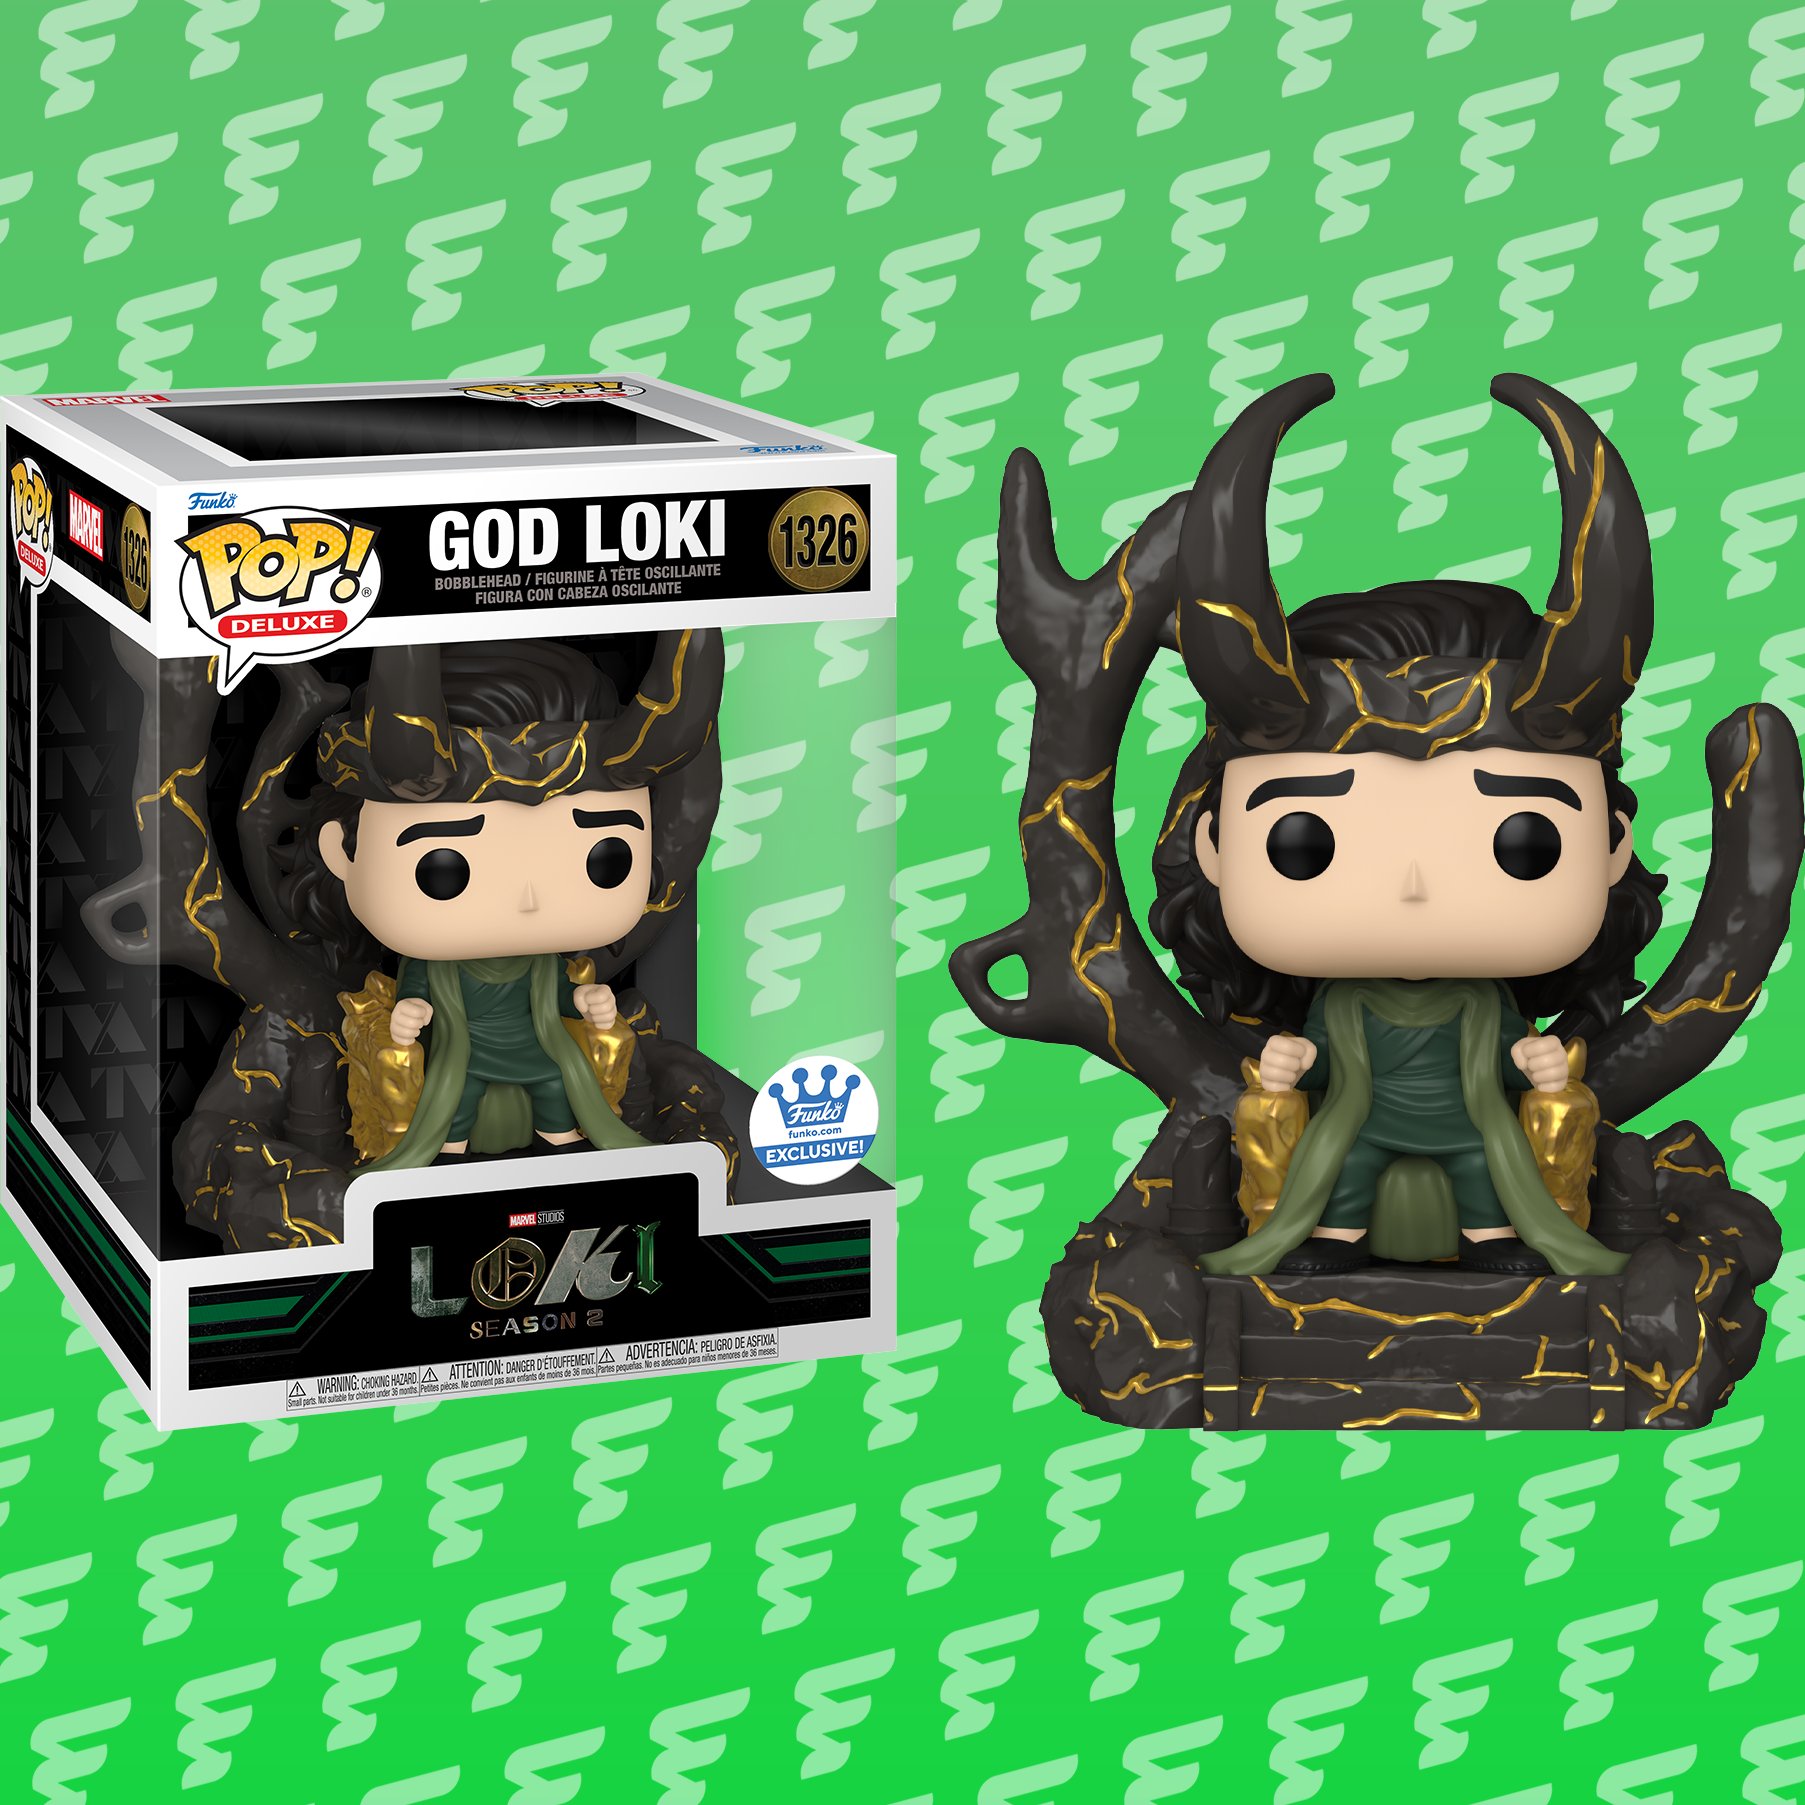 FunkoFinderz  Funko Pop! News & More! on X: First look at Funko Exclusive  God Loki Pop! Deluxe. Coming soon! #Loki #LokiSeason2 #LokiS2 #Funko # FunkoPop #FunkoPopVinyl  / X